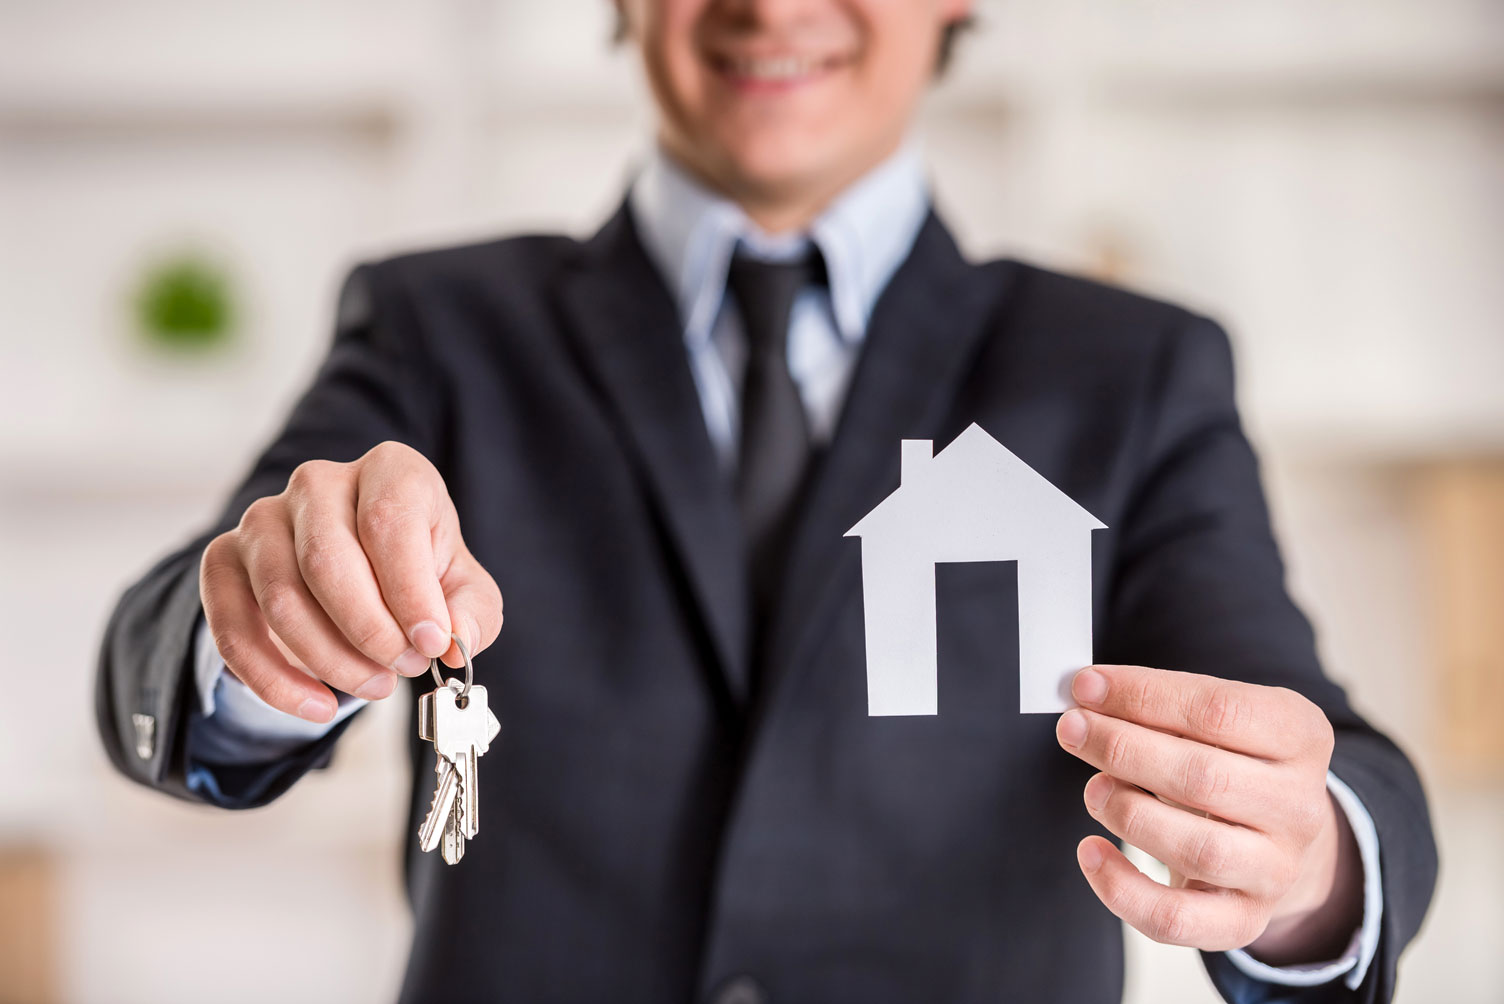 Realtor, real estate agent, become a landlord